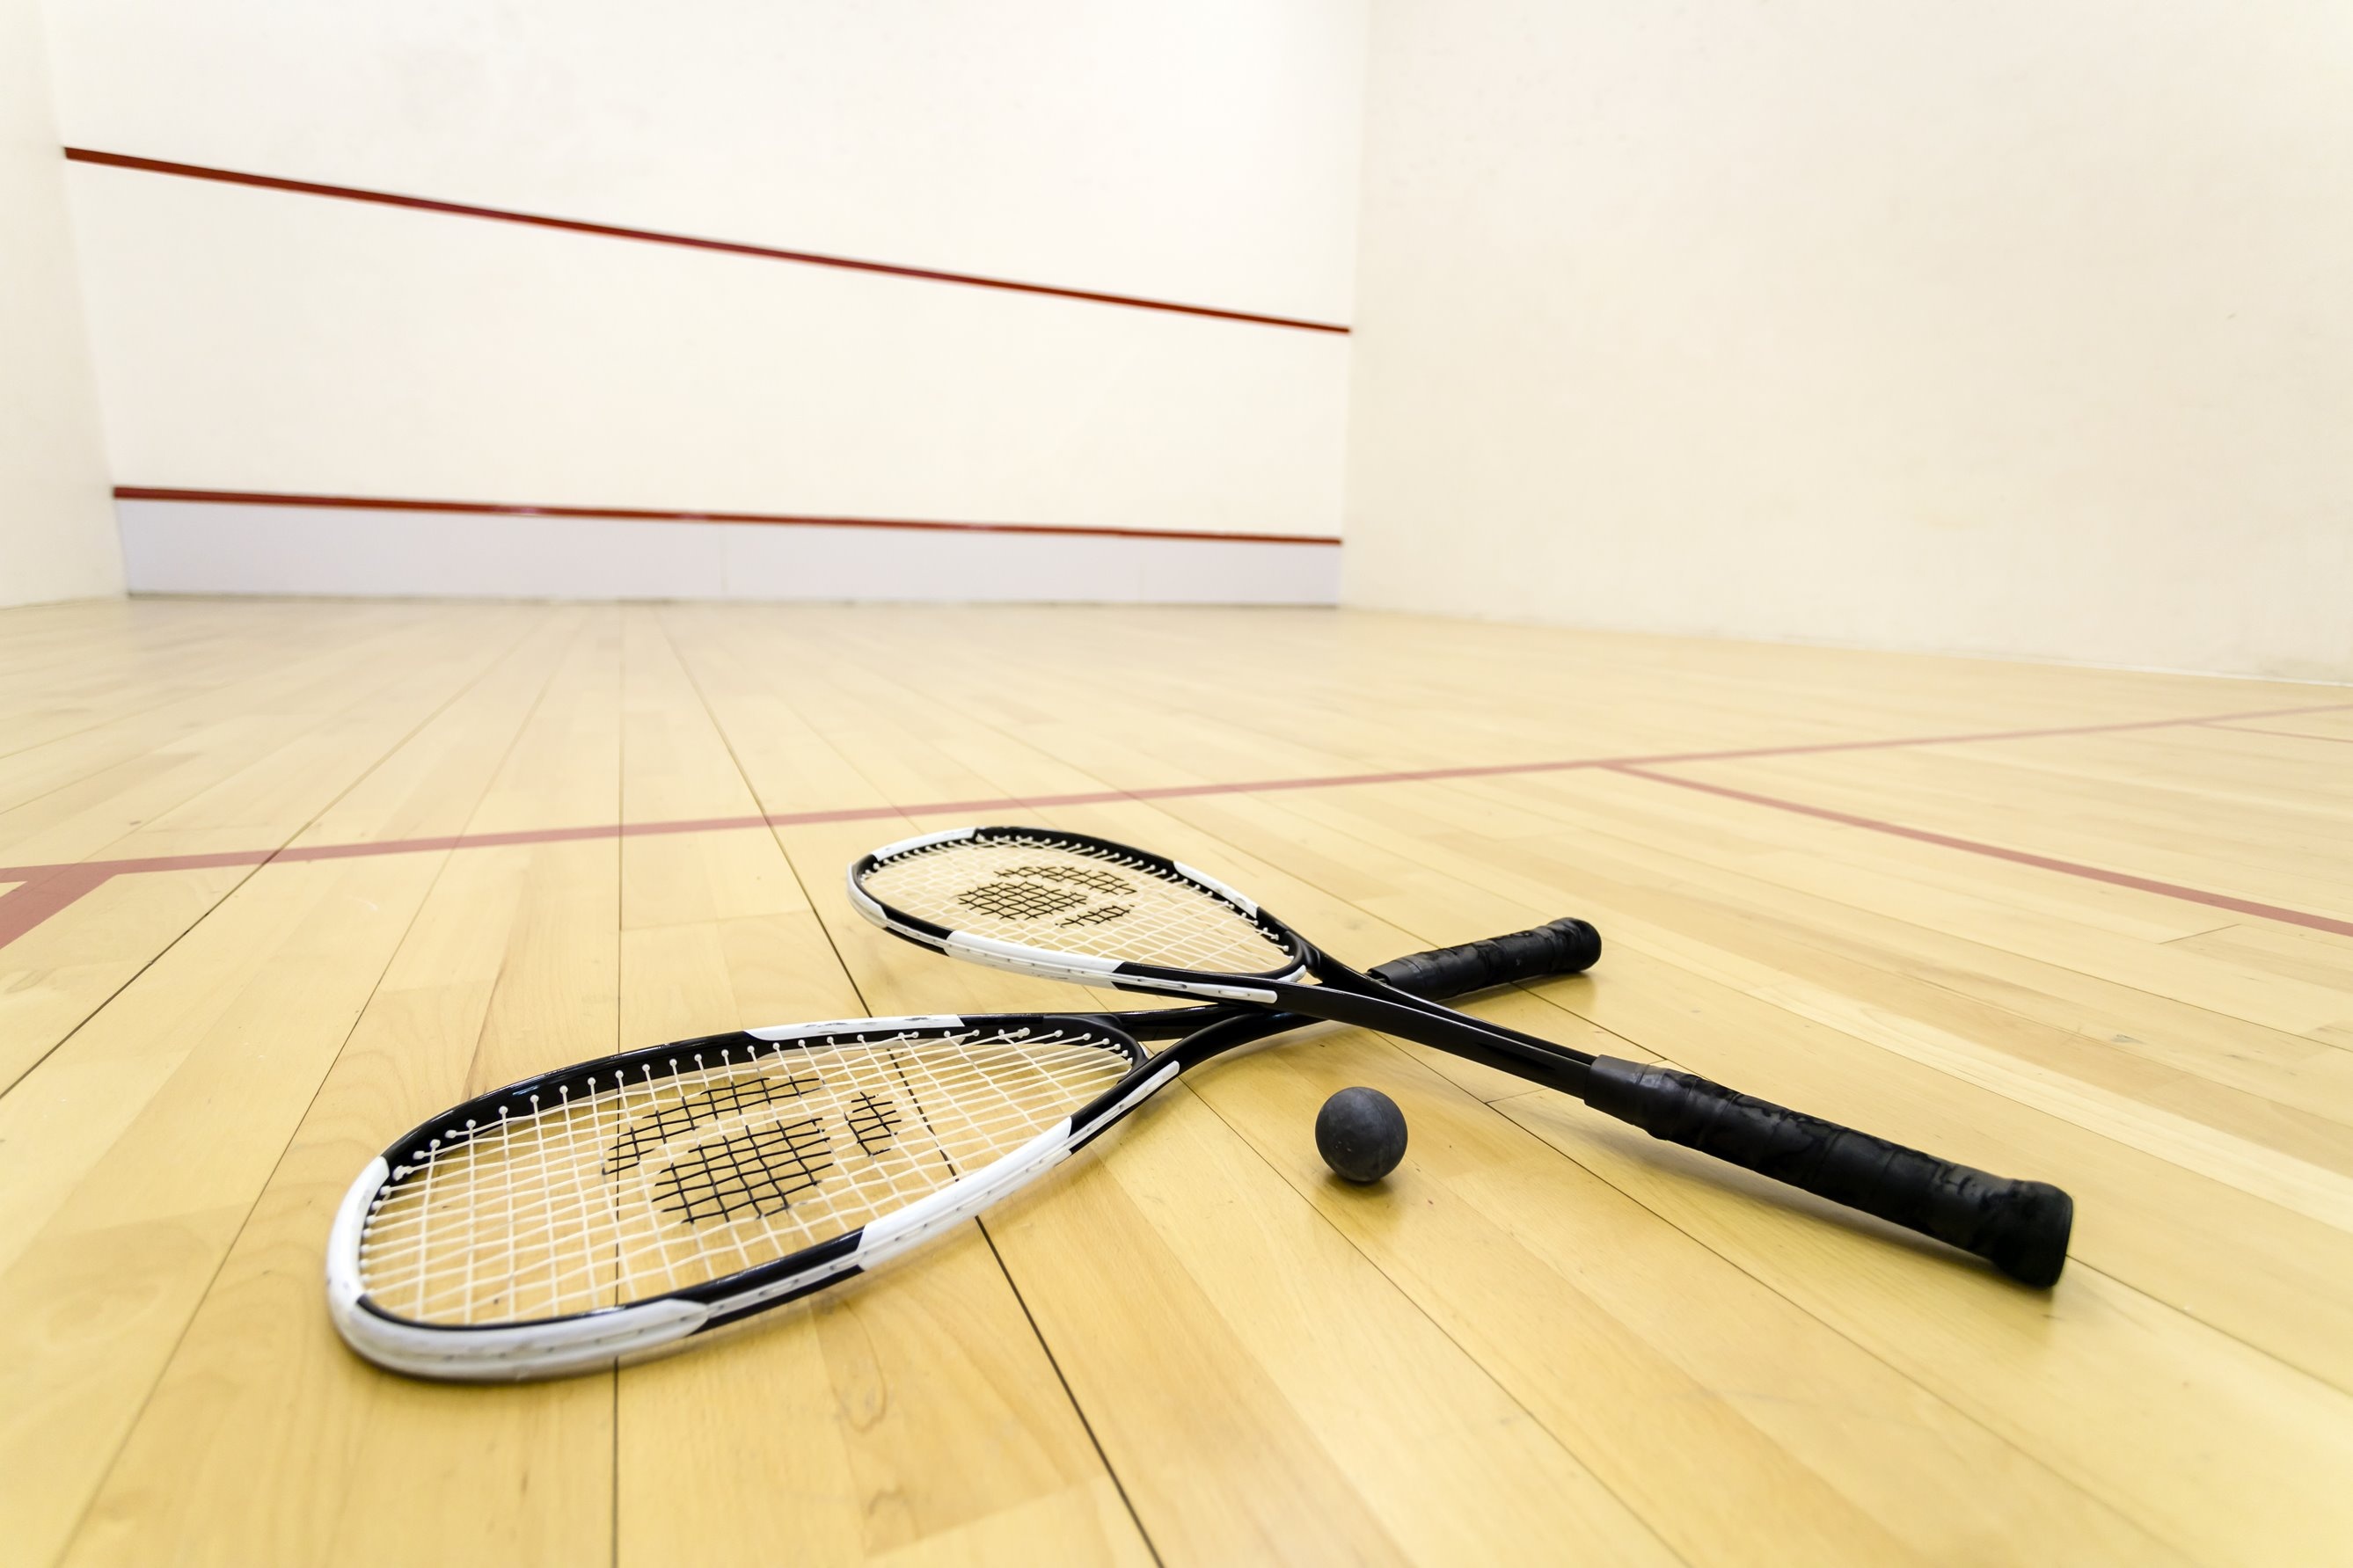 Squash (Sport): A Racket and Ball Sport Played in a Four-Walled Court With a Small Rubber Ball, Sports Gear. 2680x1790 HD Wallpaper.